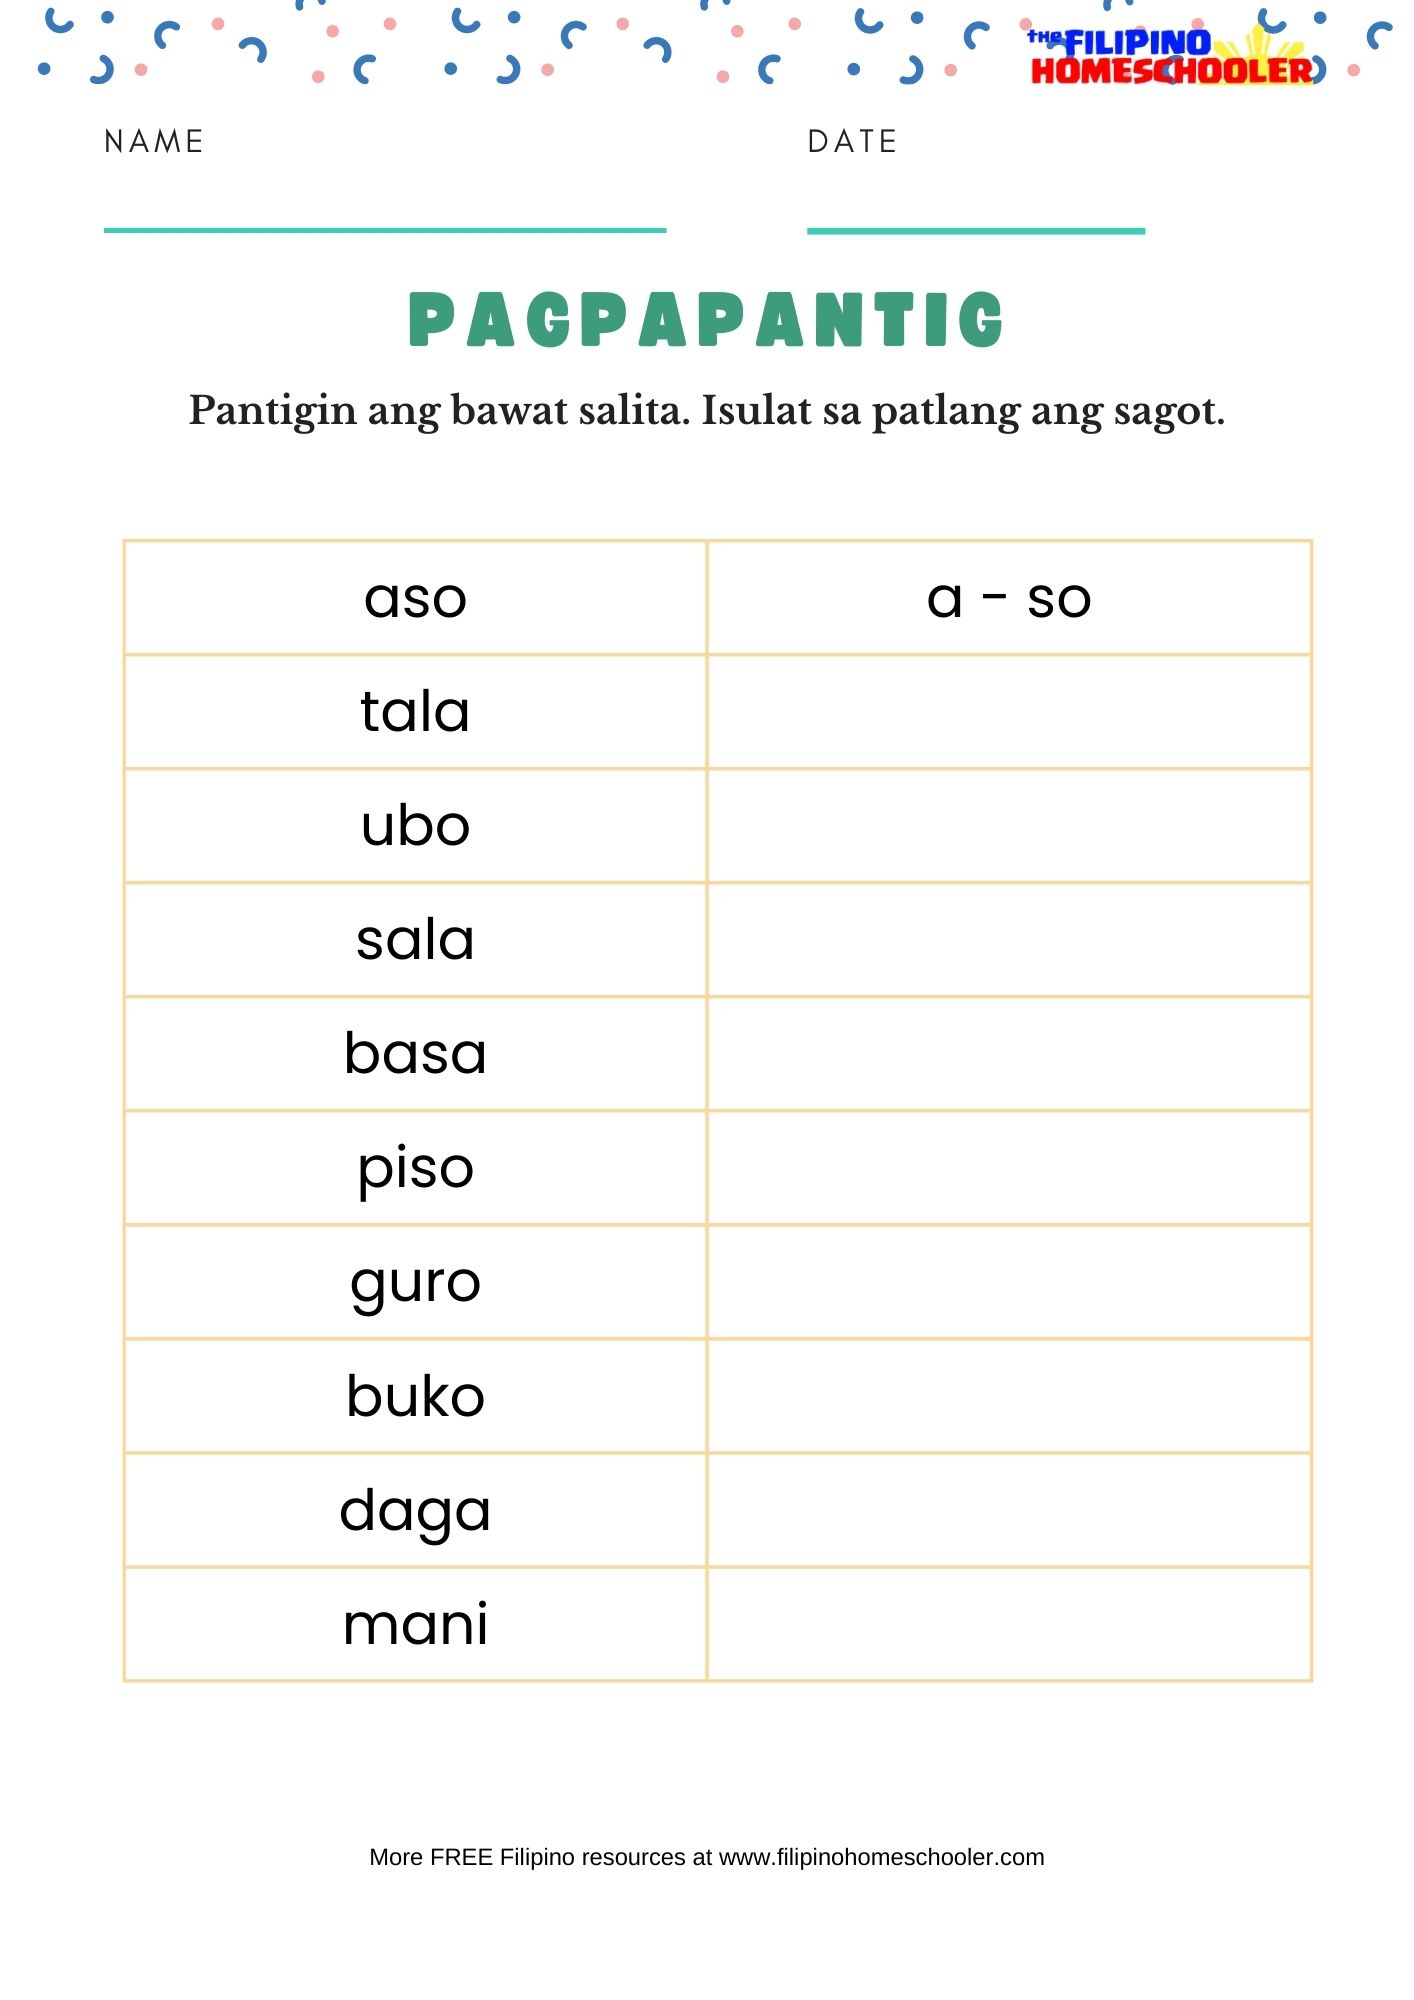 tagalog-reading-comprehension-40-pages-black-and-white-shopee-philippines